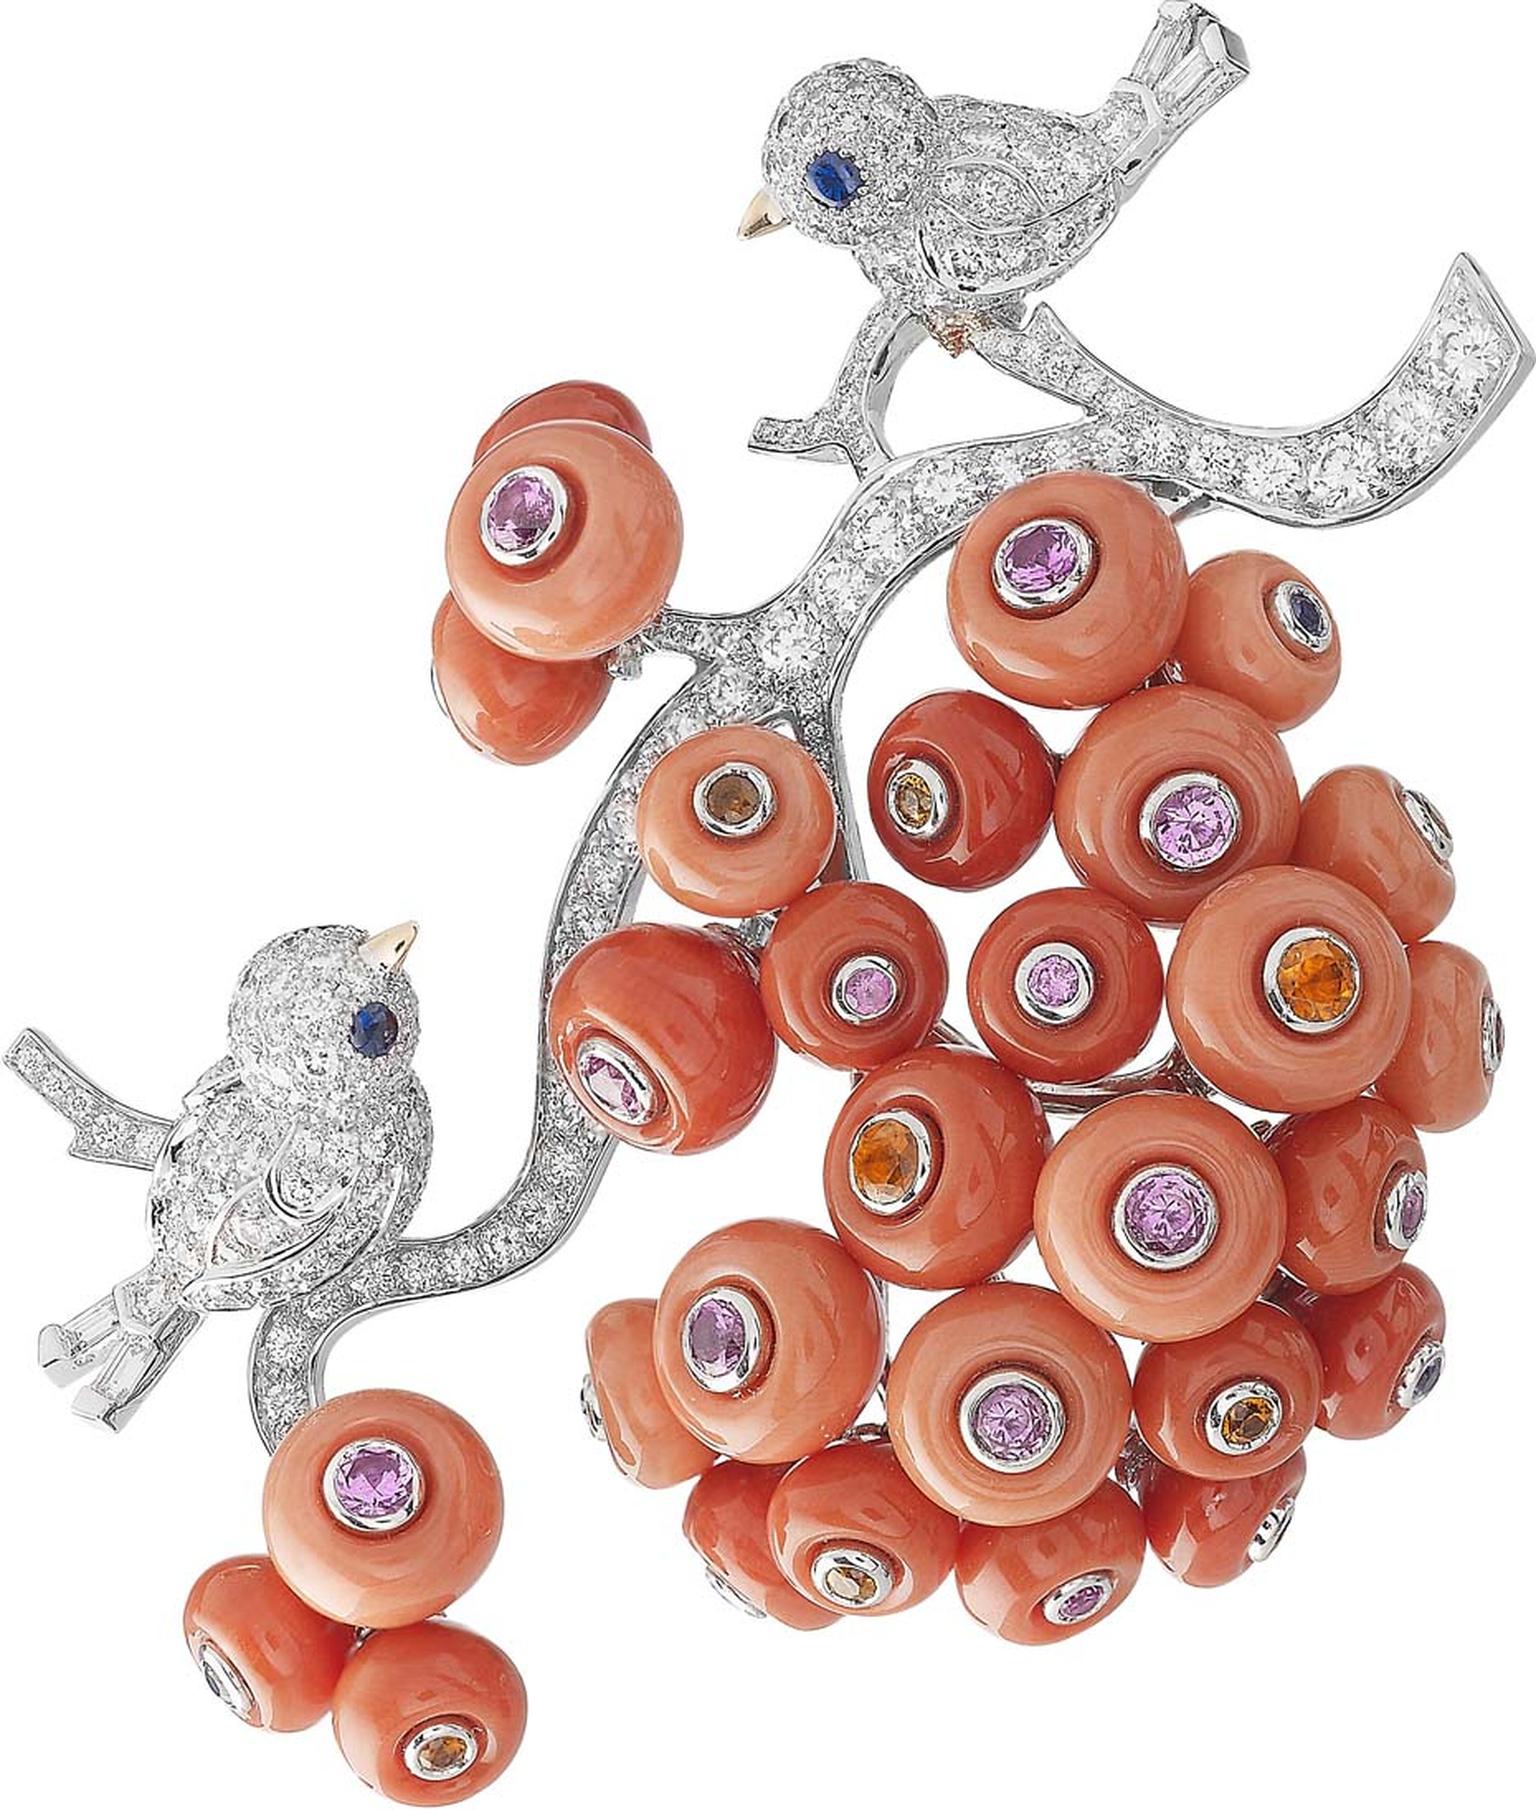 Van Cleef & Arpels Peau d'Âne collection white and pink gold Piou-Piou brooch with round and baguette diamonds, coral cabochons, spessartite garnets and multi-coloured sapphires.